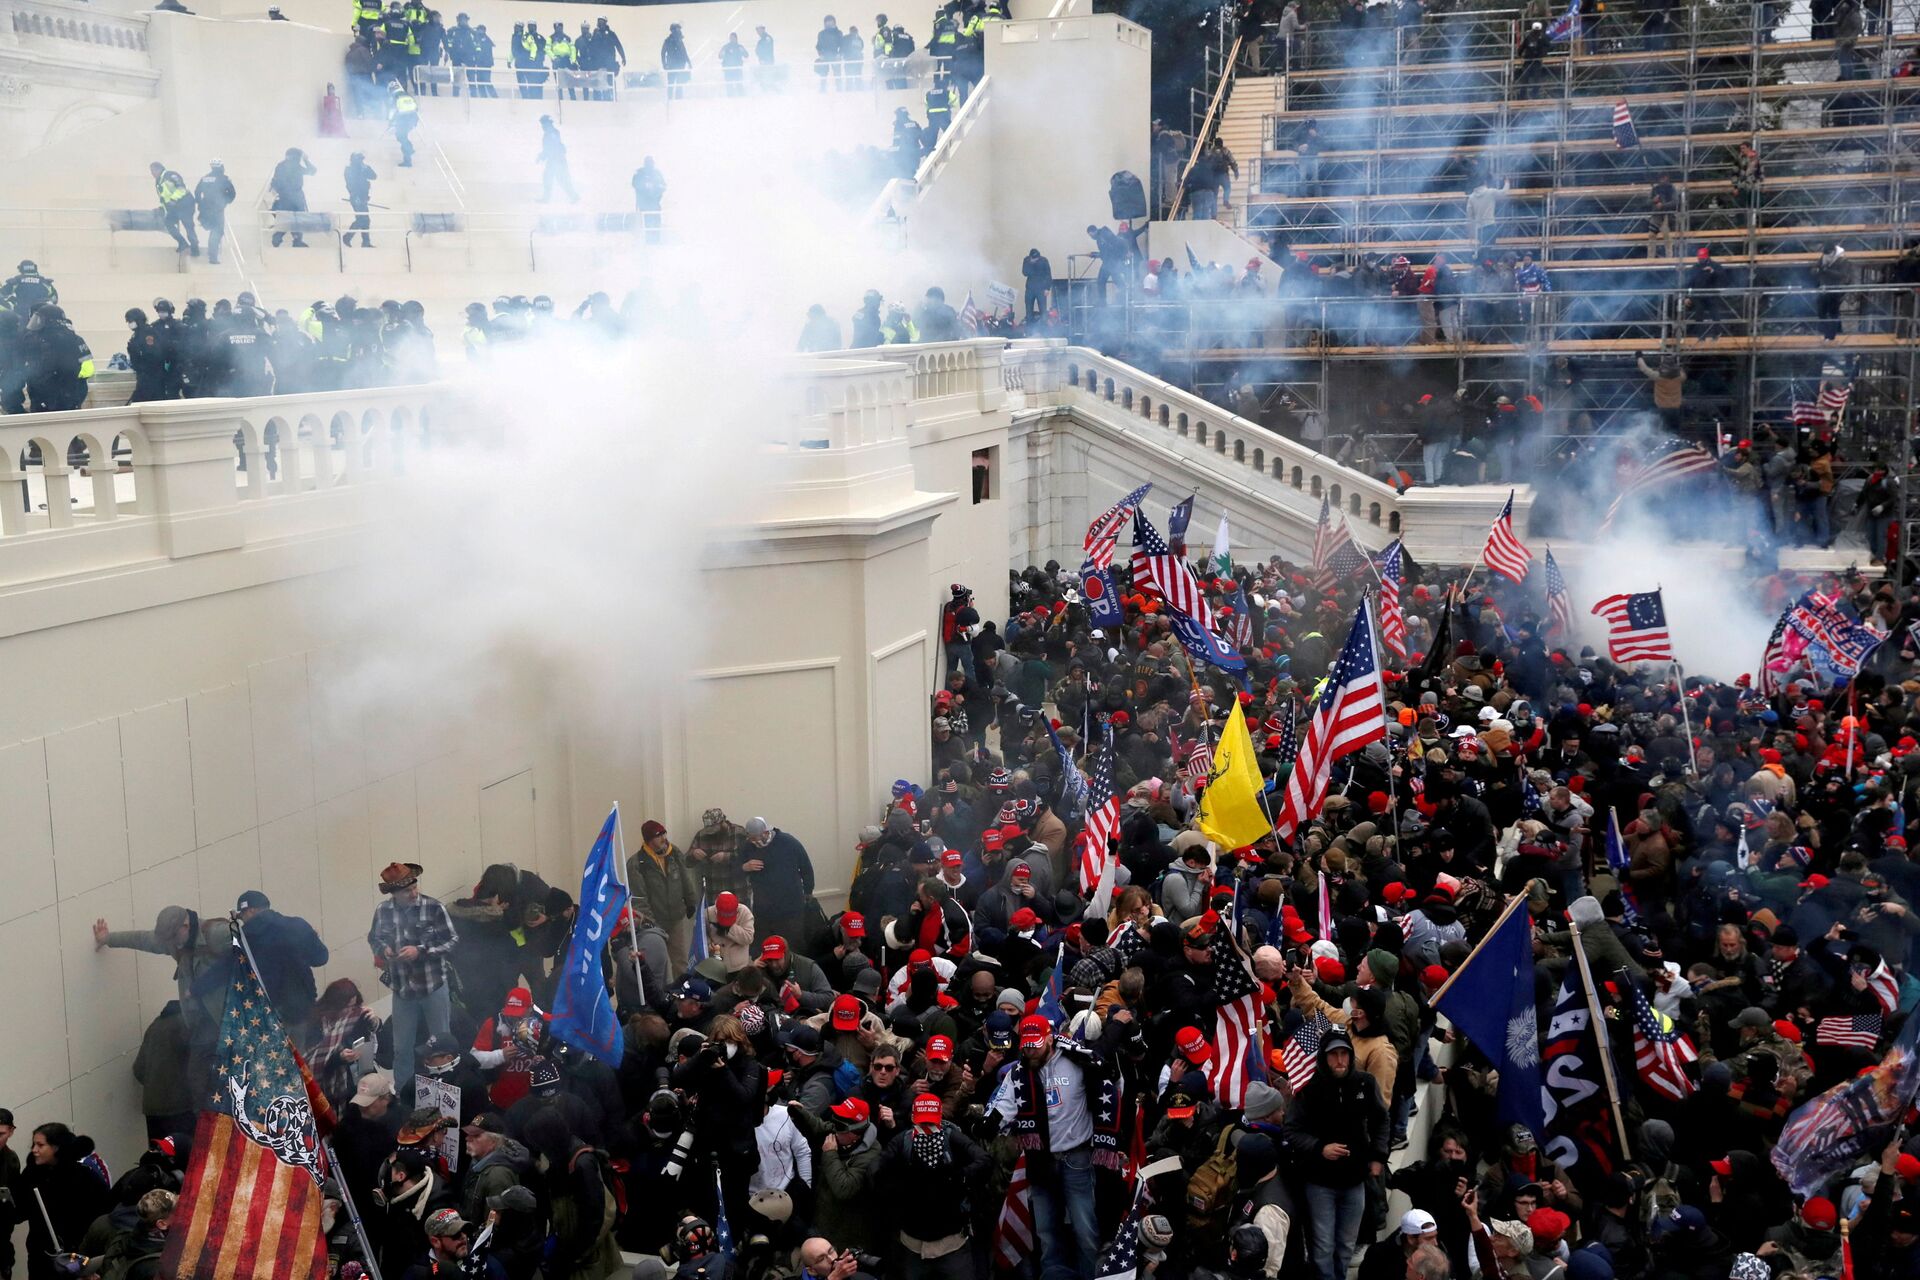 Police release tear gas into a crowd of pro-Trump protesters during clashes at a rally to contest the certification of the 2020 U.S. presidential election results by the U.S. Congress, at the U.S. Capitol Building in Washington, U.S, January 6, 2021. - Sputnik International, 1920, 07.09.2021